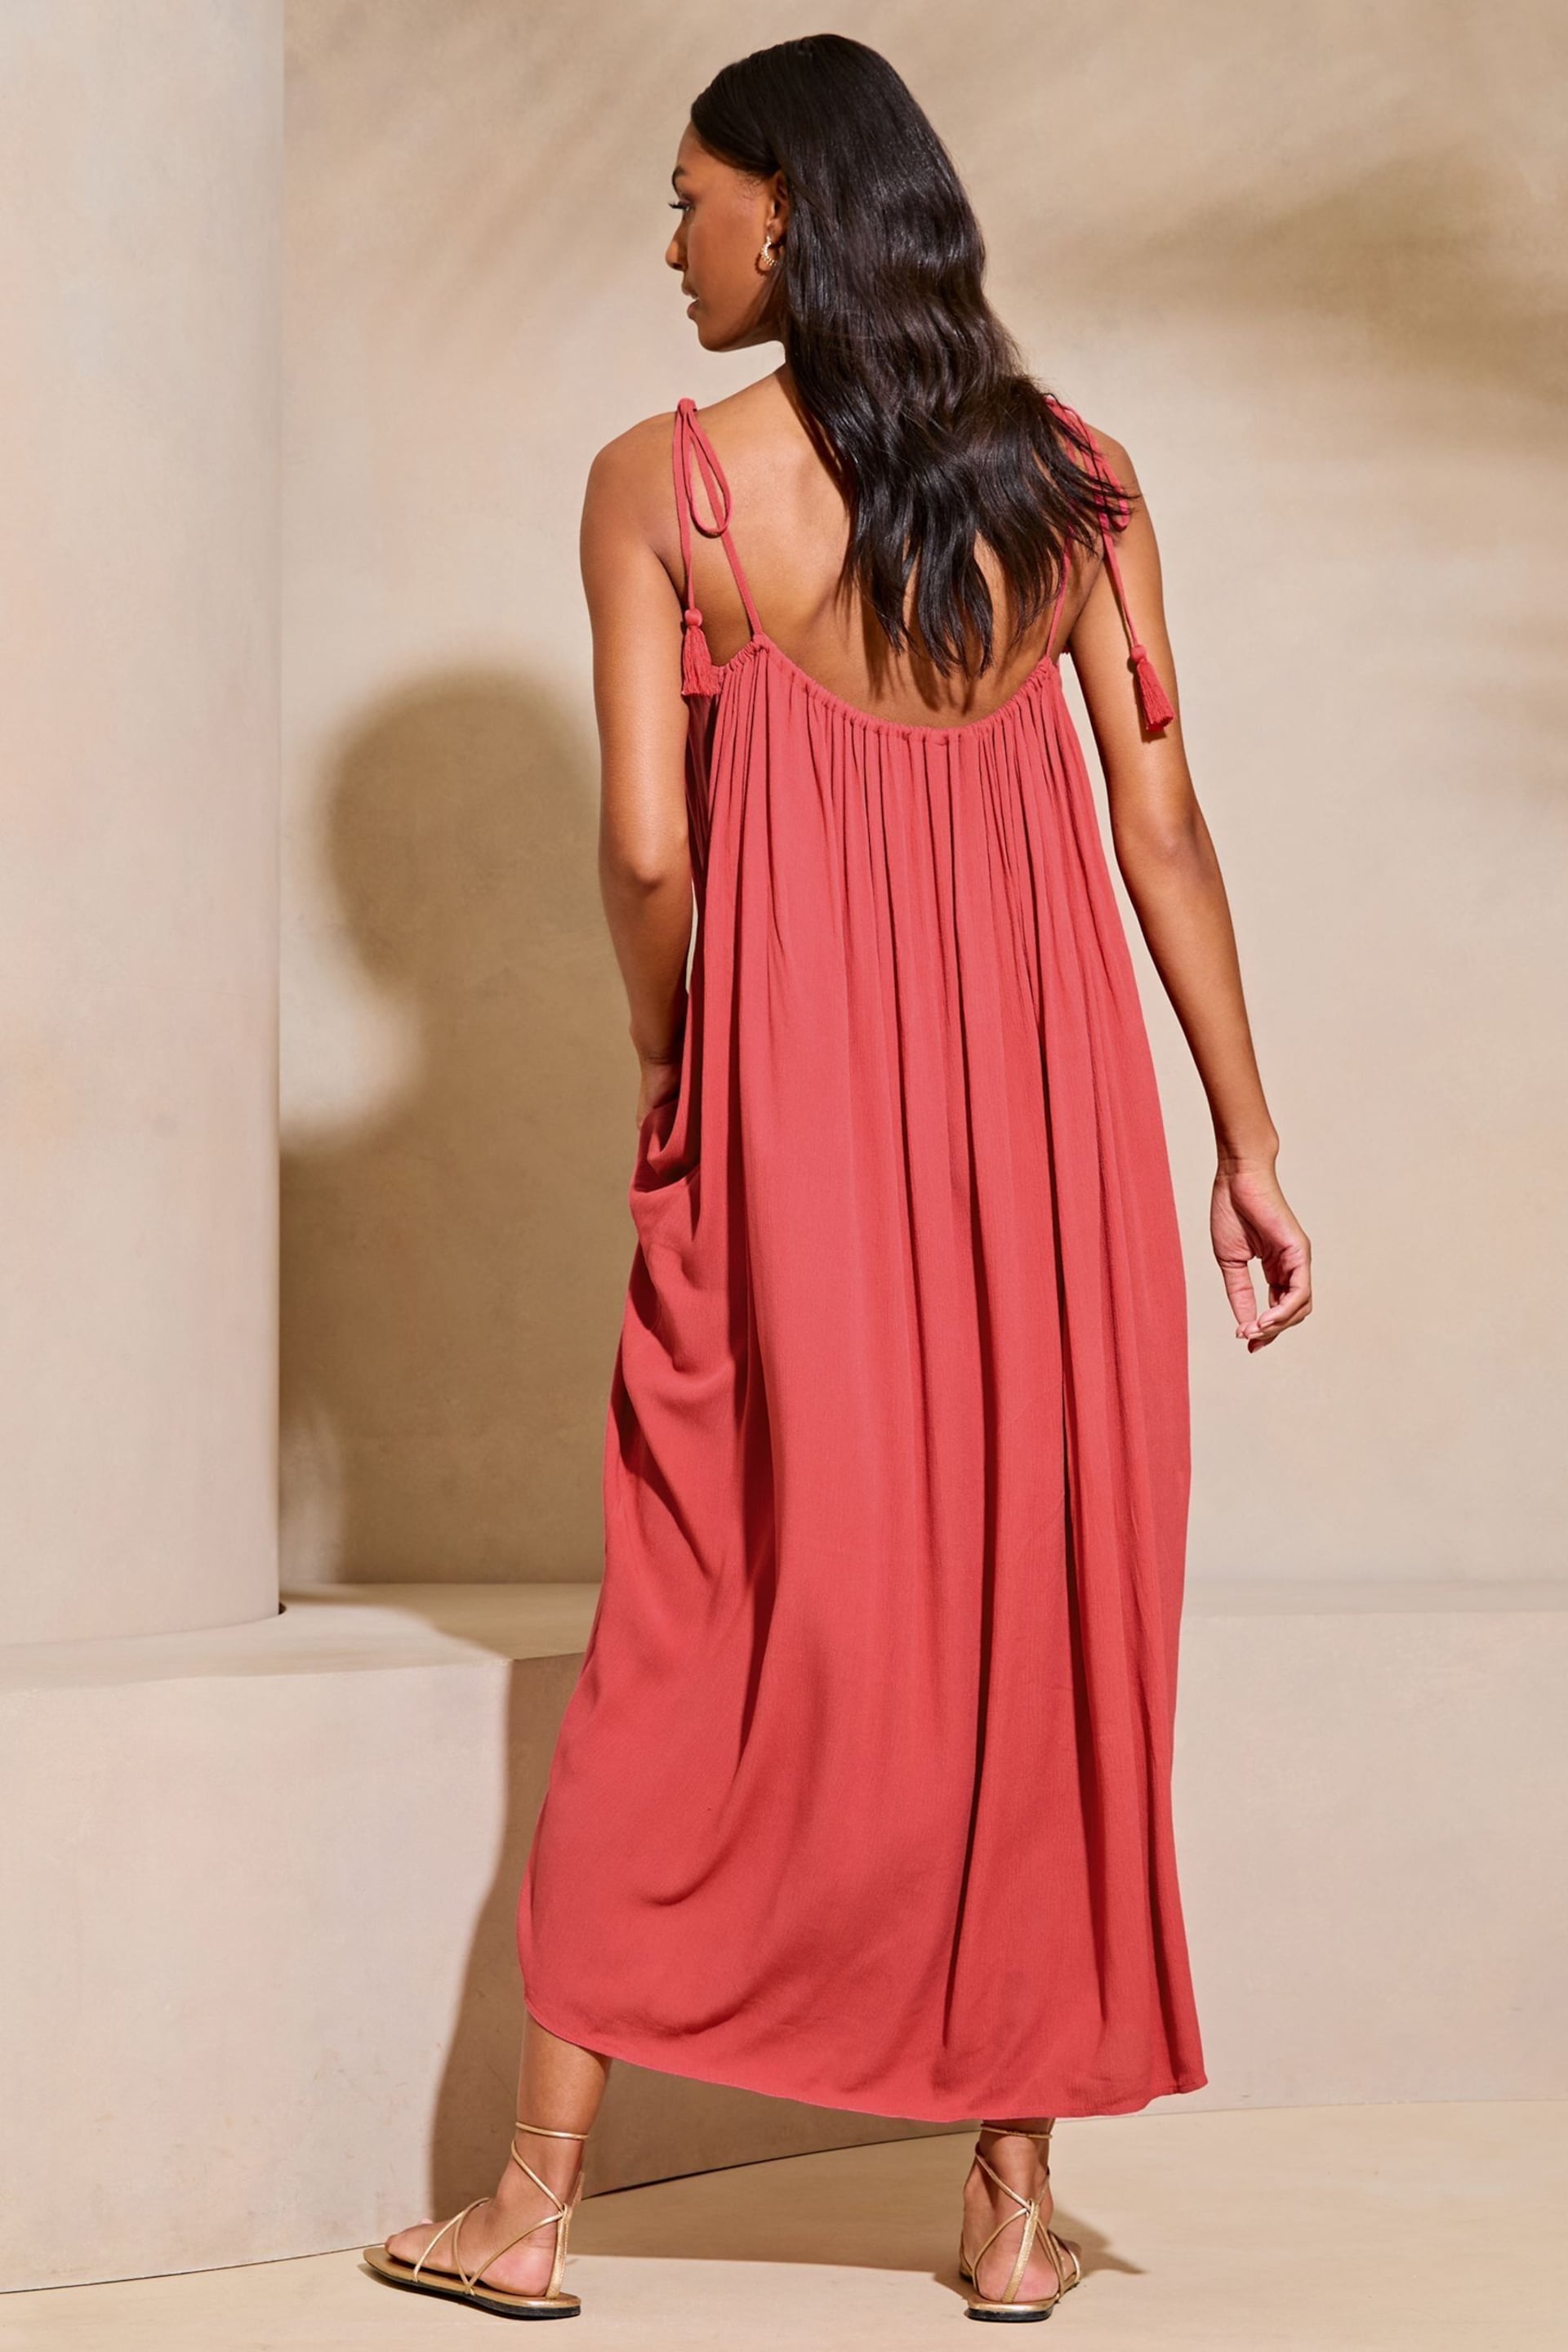 Lipsy Pink Palm Crinkle Holiday Maxi Dress - Image 2 of 4